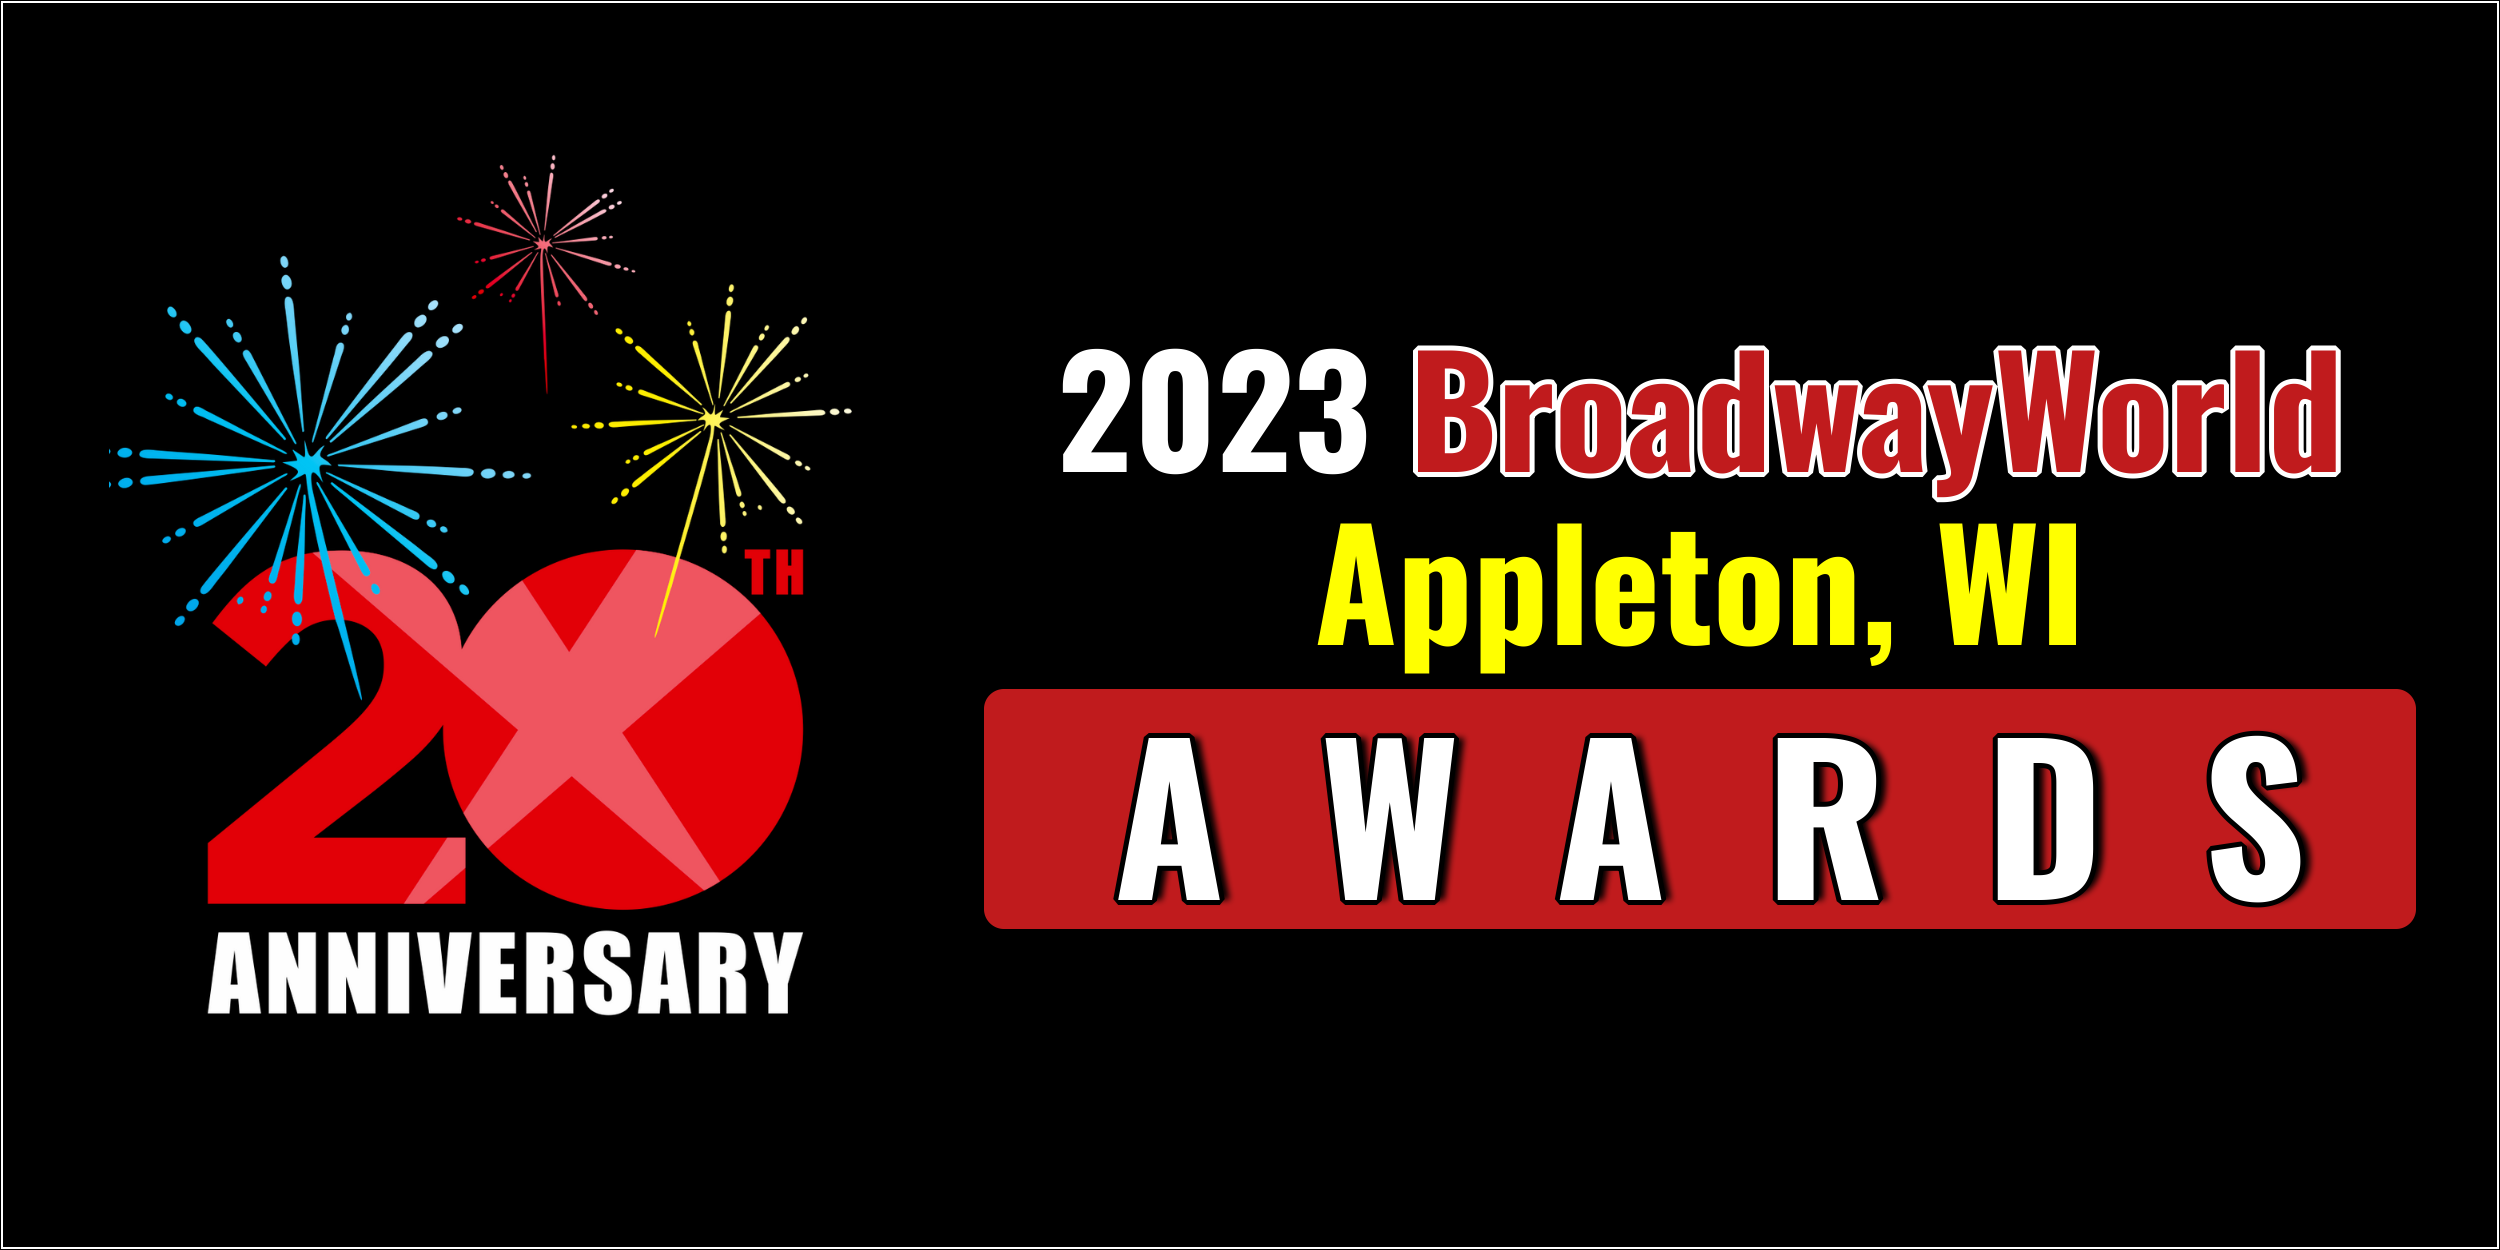 Latest Standings Announced For The 2023 BroadwayWorld Appleton, WI Awards; TICK TICK BOOM Leads Best Musical! 